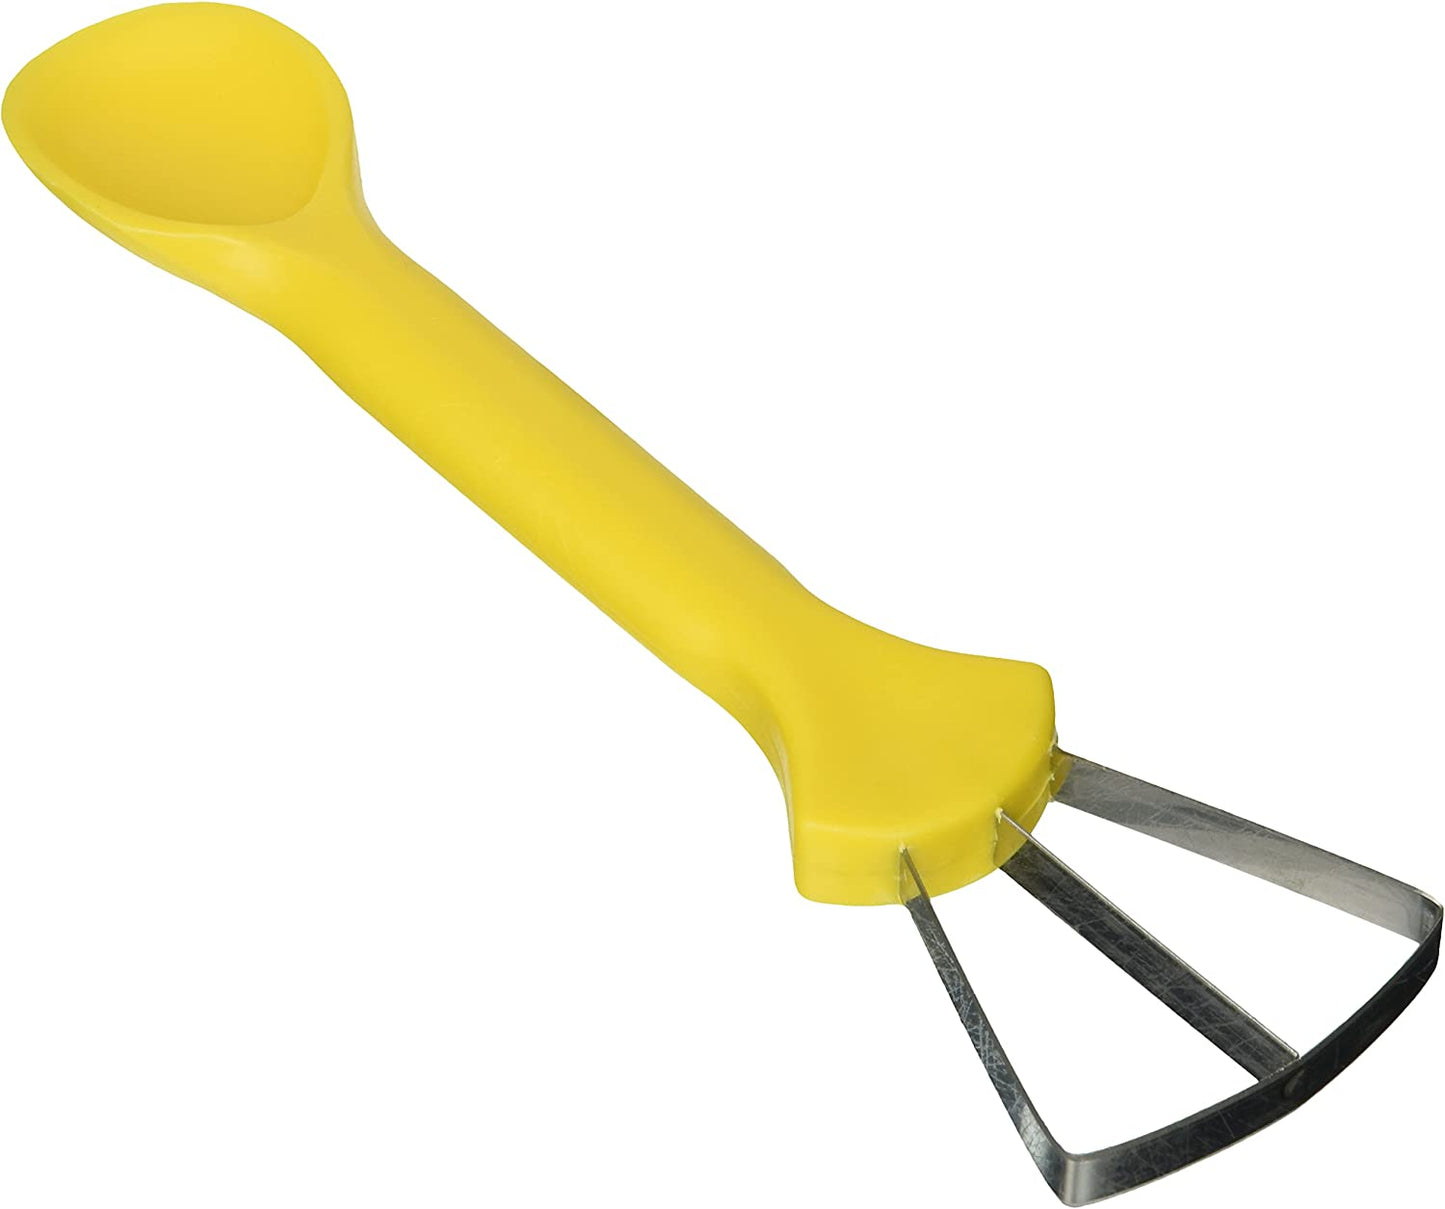 FUNKY BUDDHA Plastic Melon Seeder, Spoon and Slicer Cutter